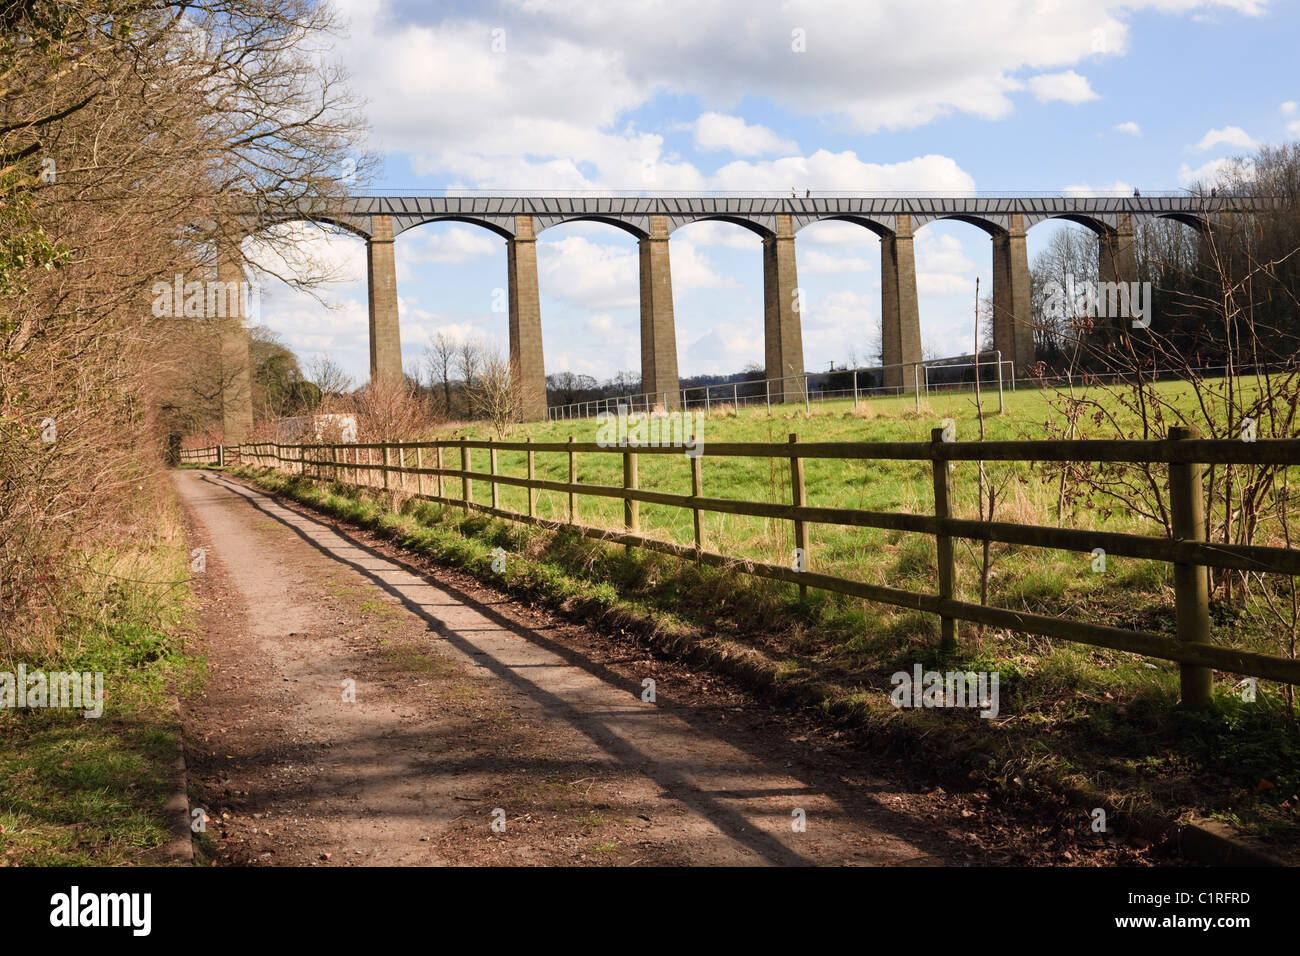 Froncysyllte, Wrexham, North Wales, UK. Telford's Pontcysyllte Aqueduct carrying the Llangollen Canal across the Dee valley. Stock Photo